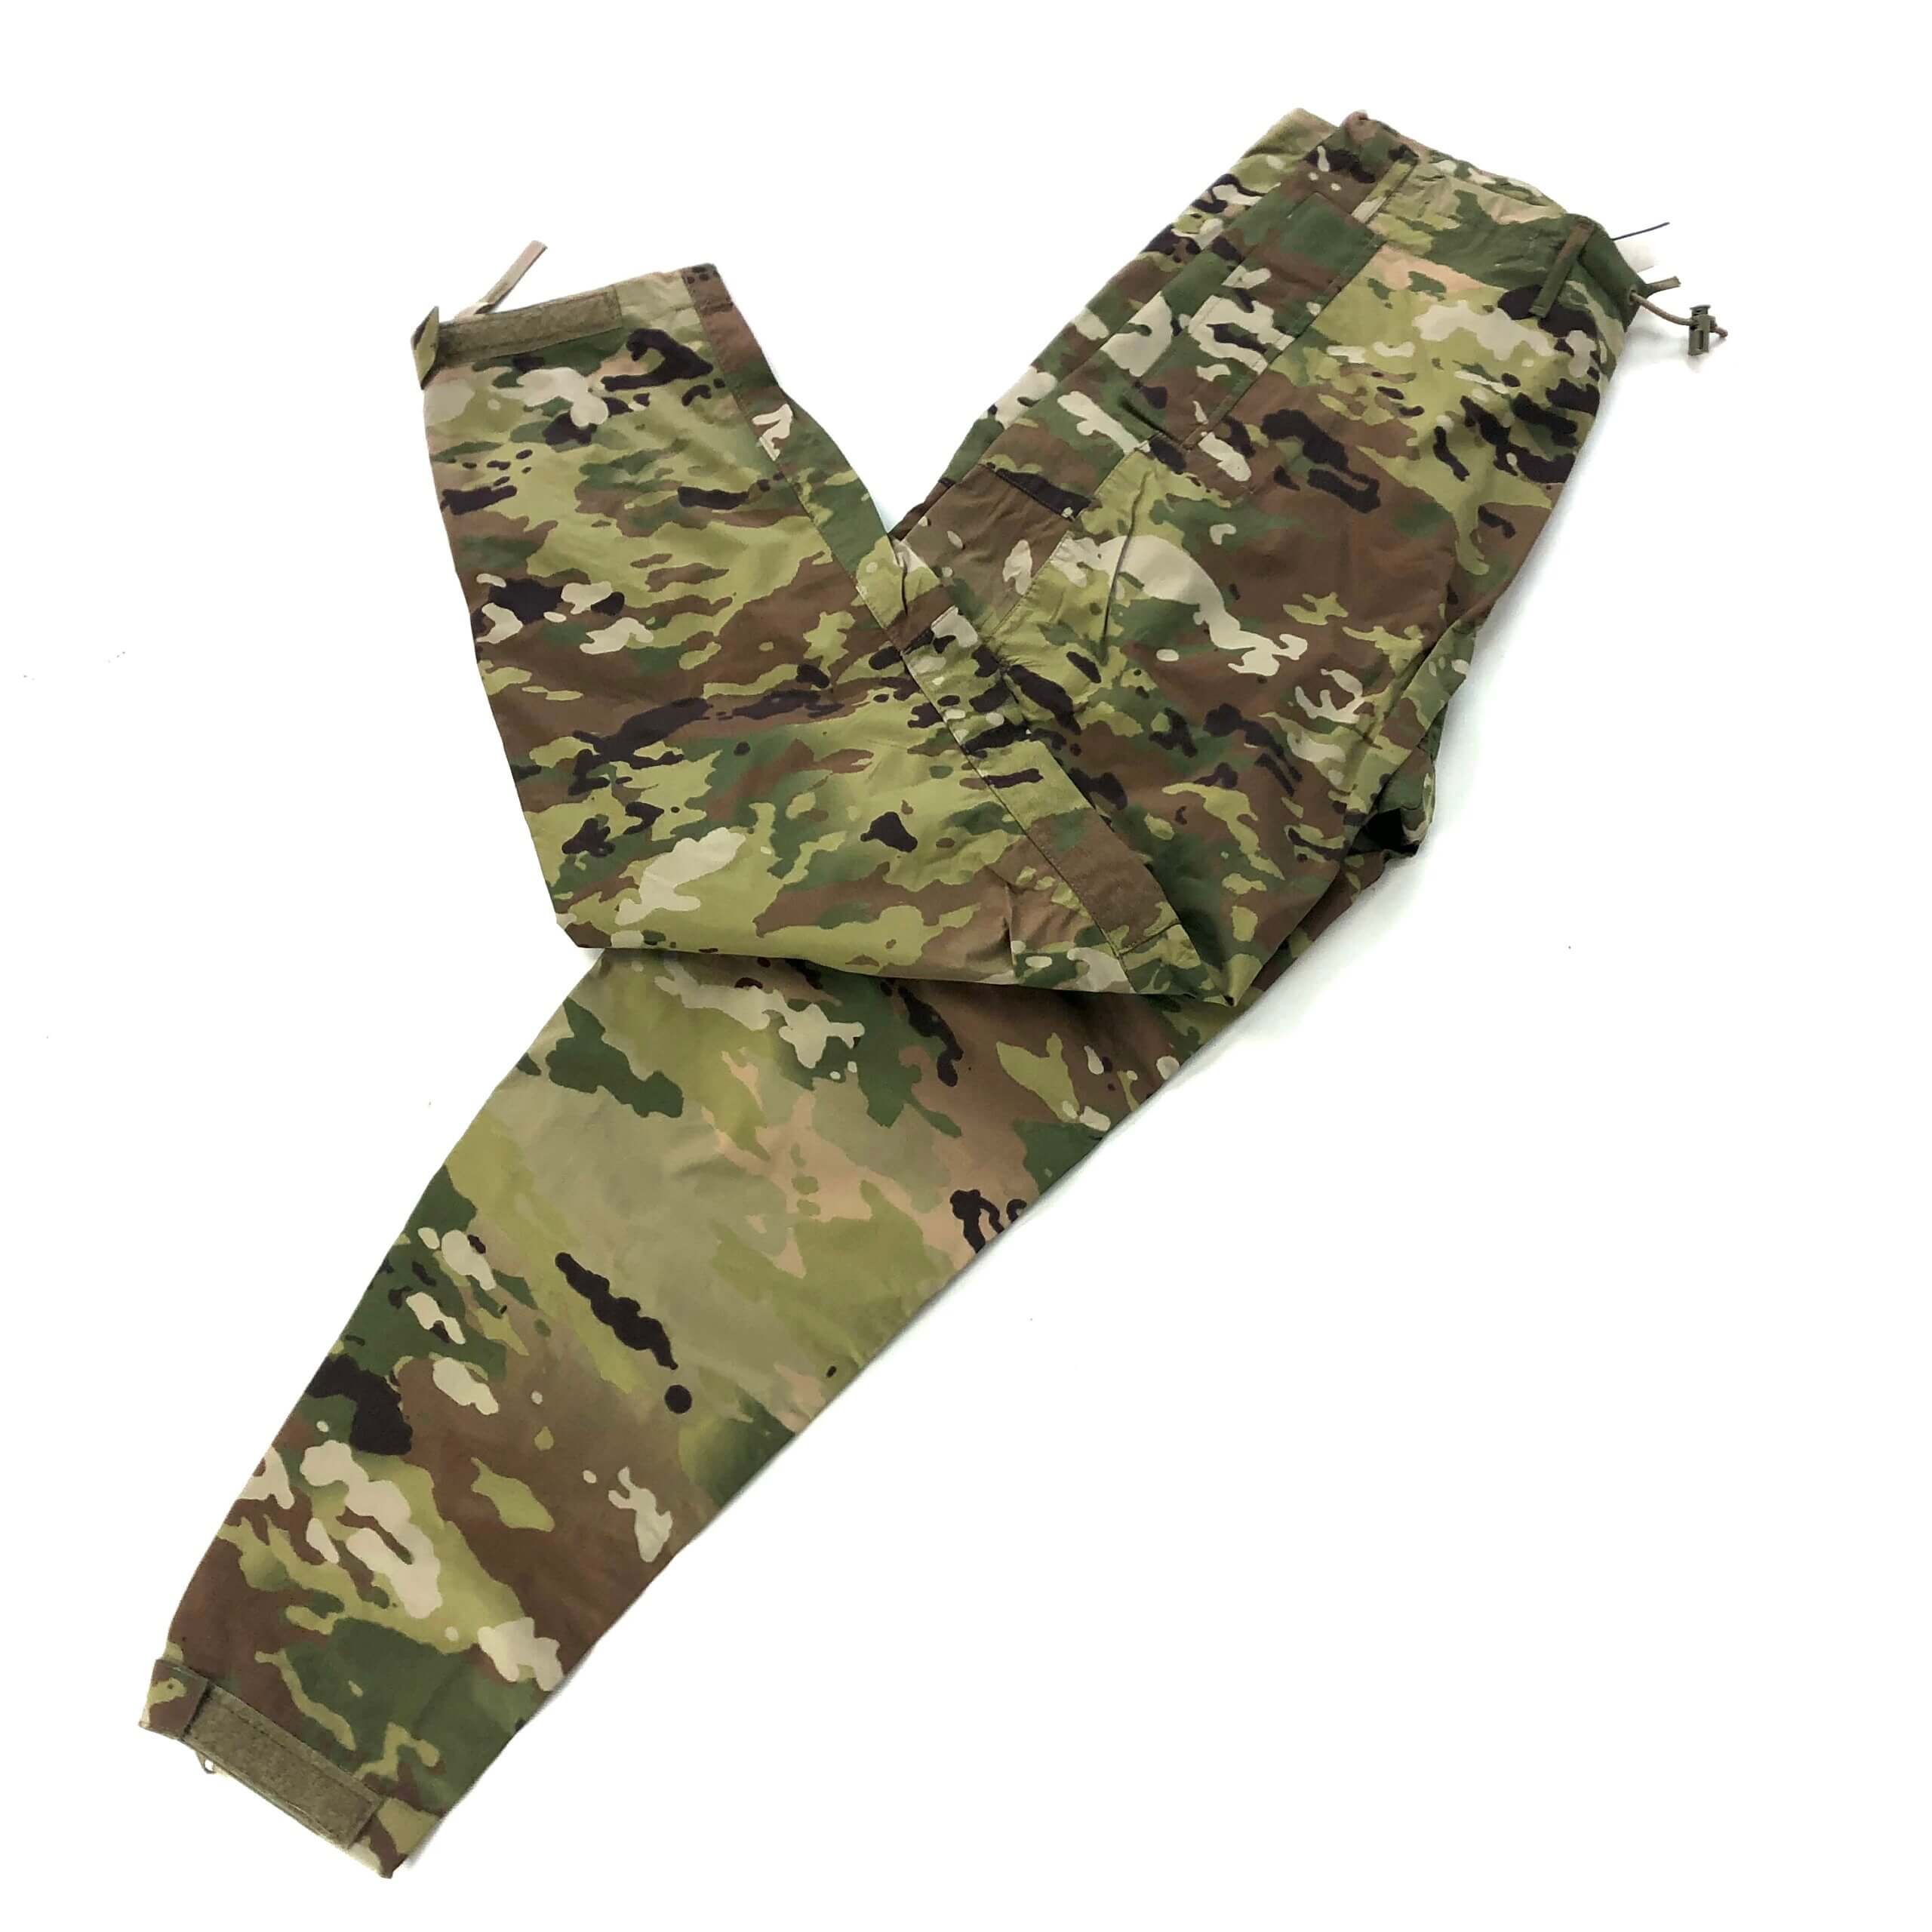 US Army Gen III Level 6 Extreme Cold & Wet Weather Pants, OCP